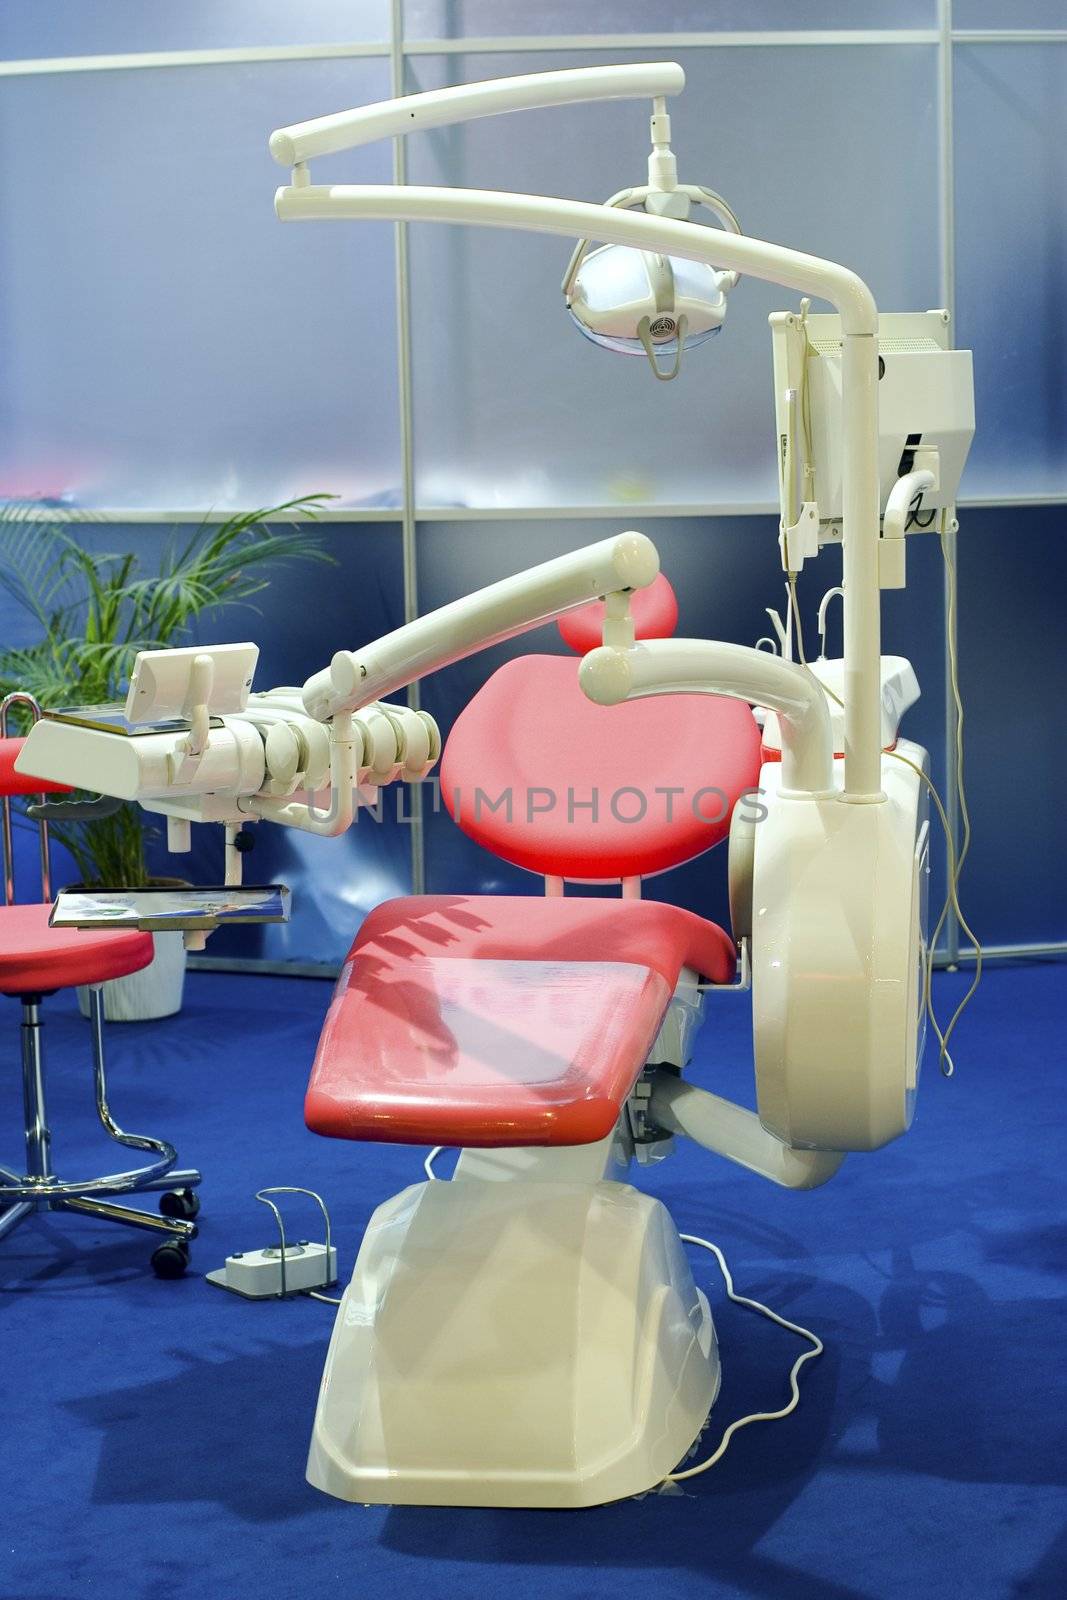 Equipment work place of dentist